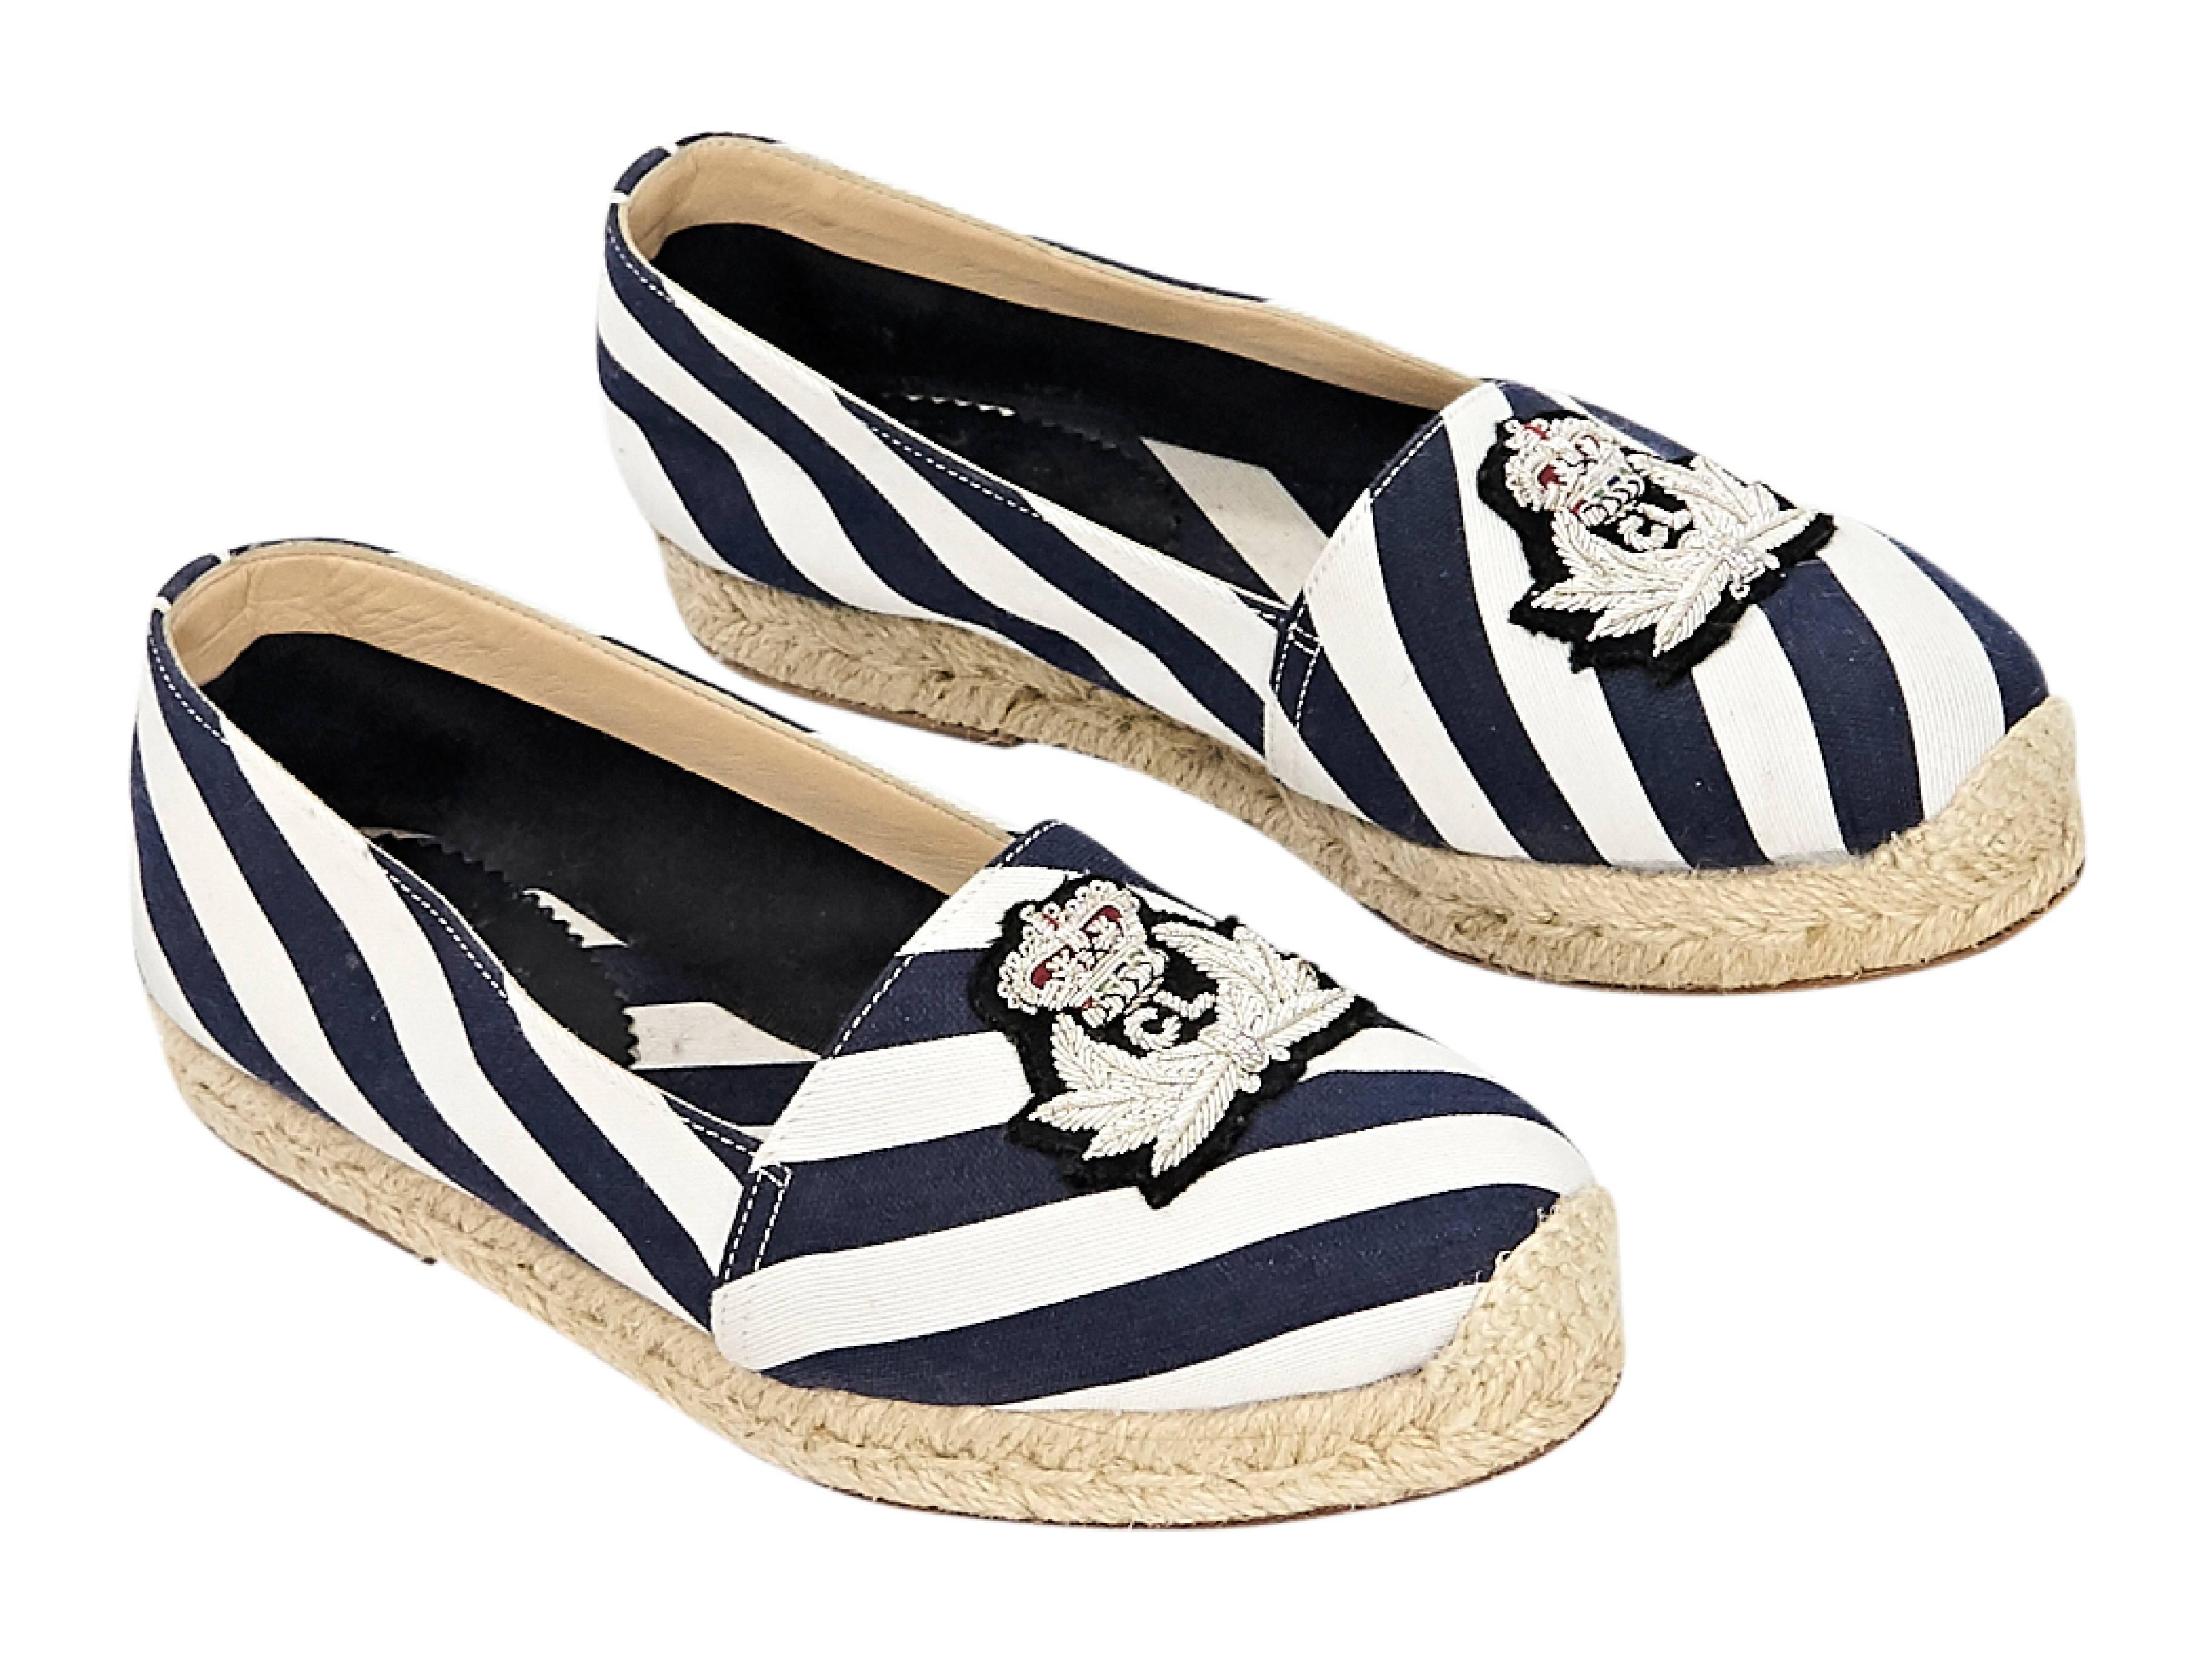 Product details:  Navy blue and white striped flat espadrilles by Christian Louboutin.  Patch accents vamp.  Round toe.  Braided jute trim.  Slip-on style. 
Condition: Pre-owned. Very good. 
Est. Retail $ 585.00